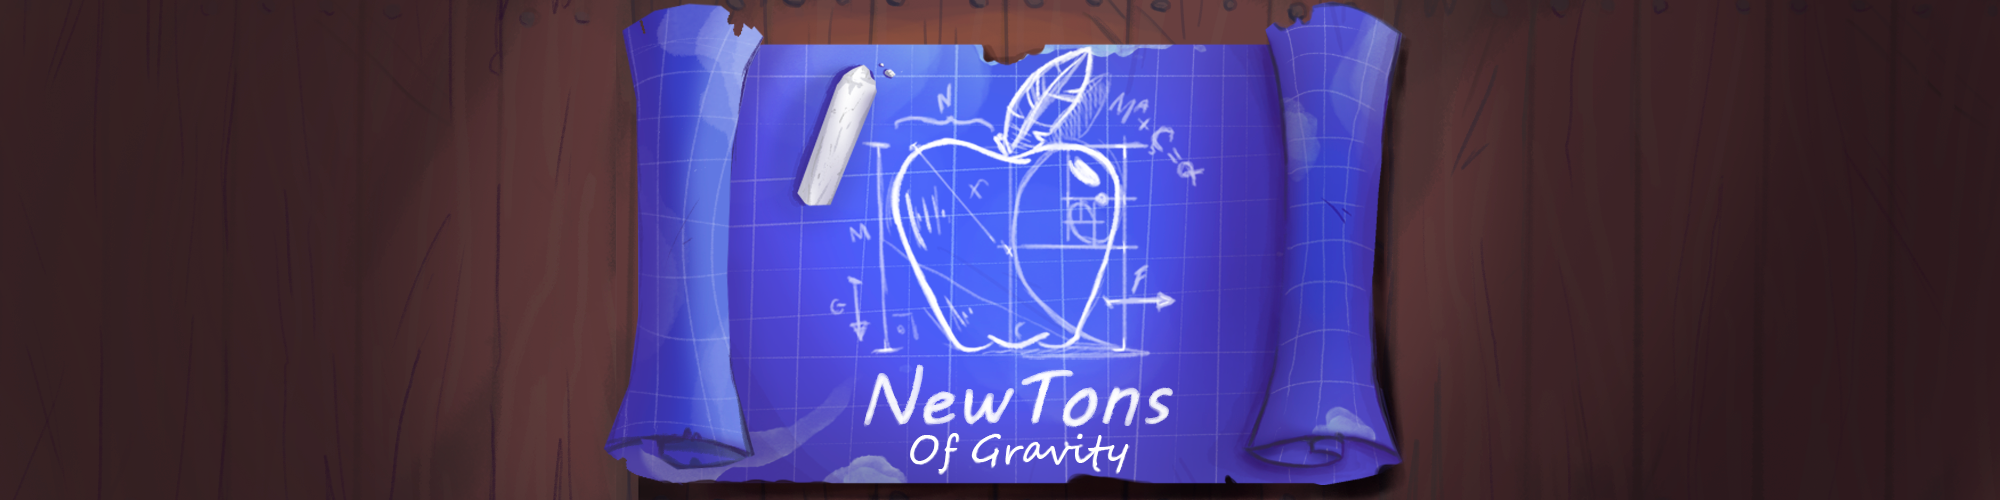 New Tons Of Gravity